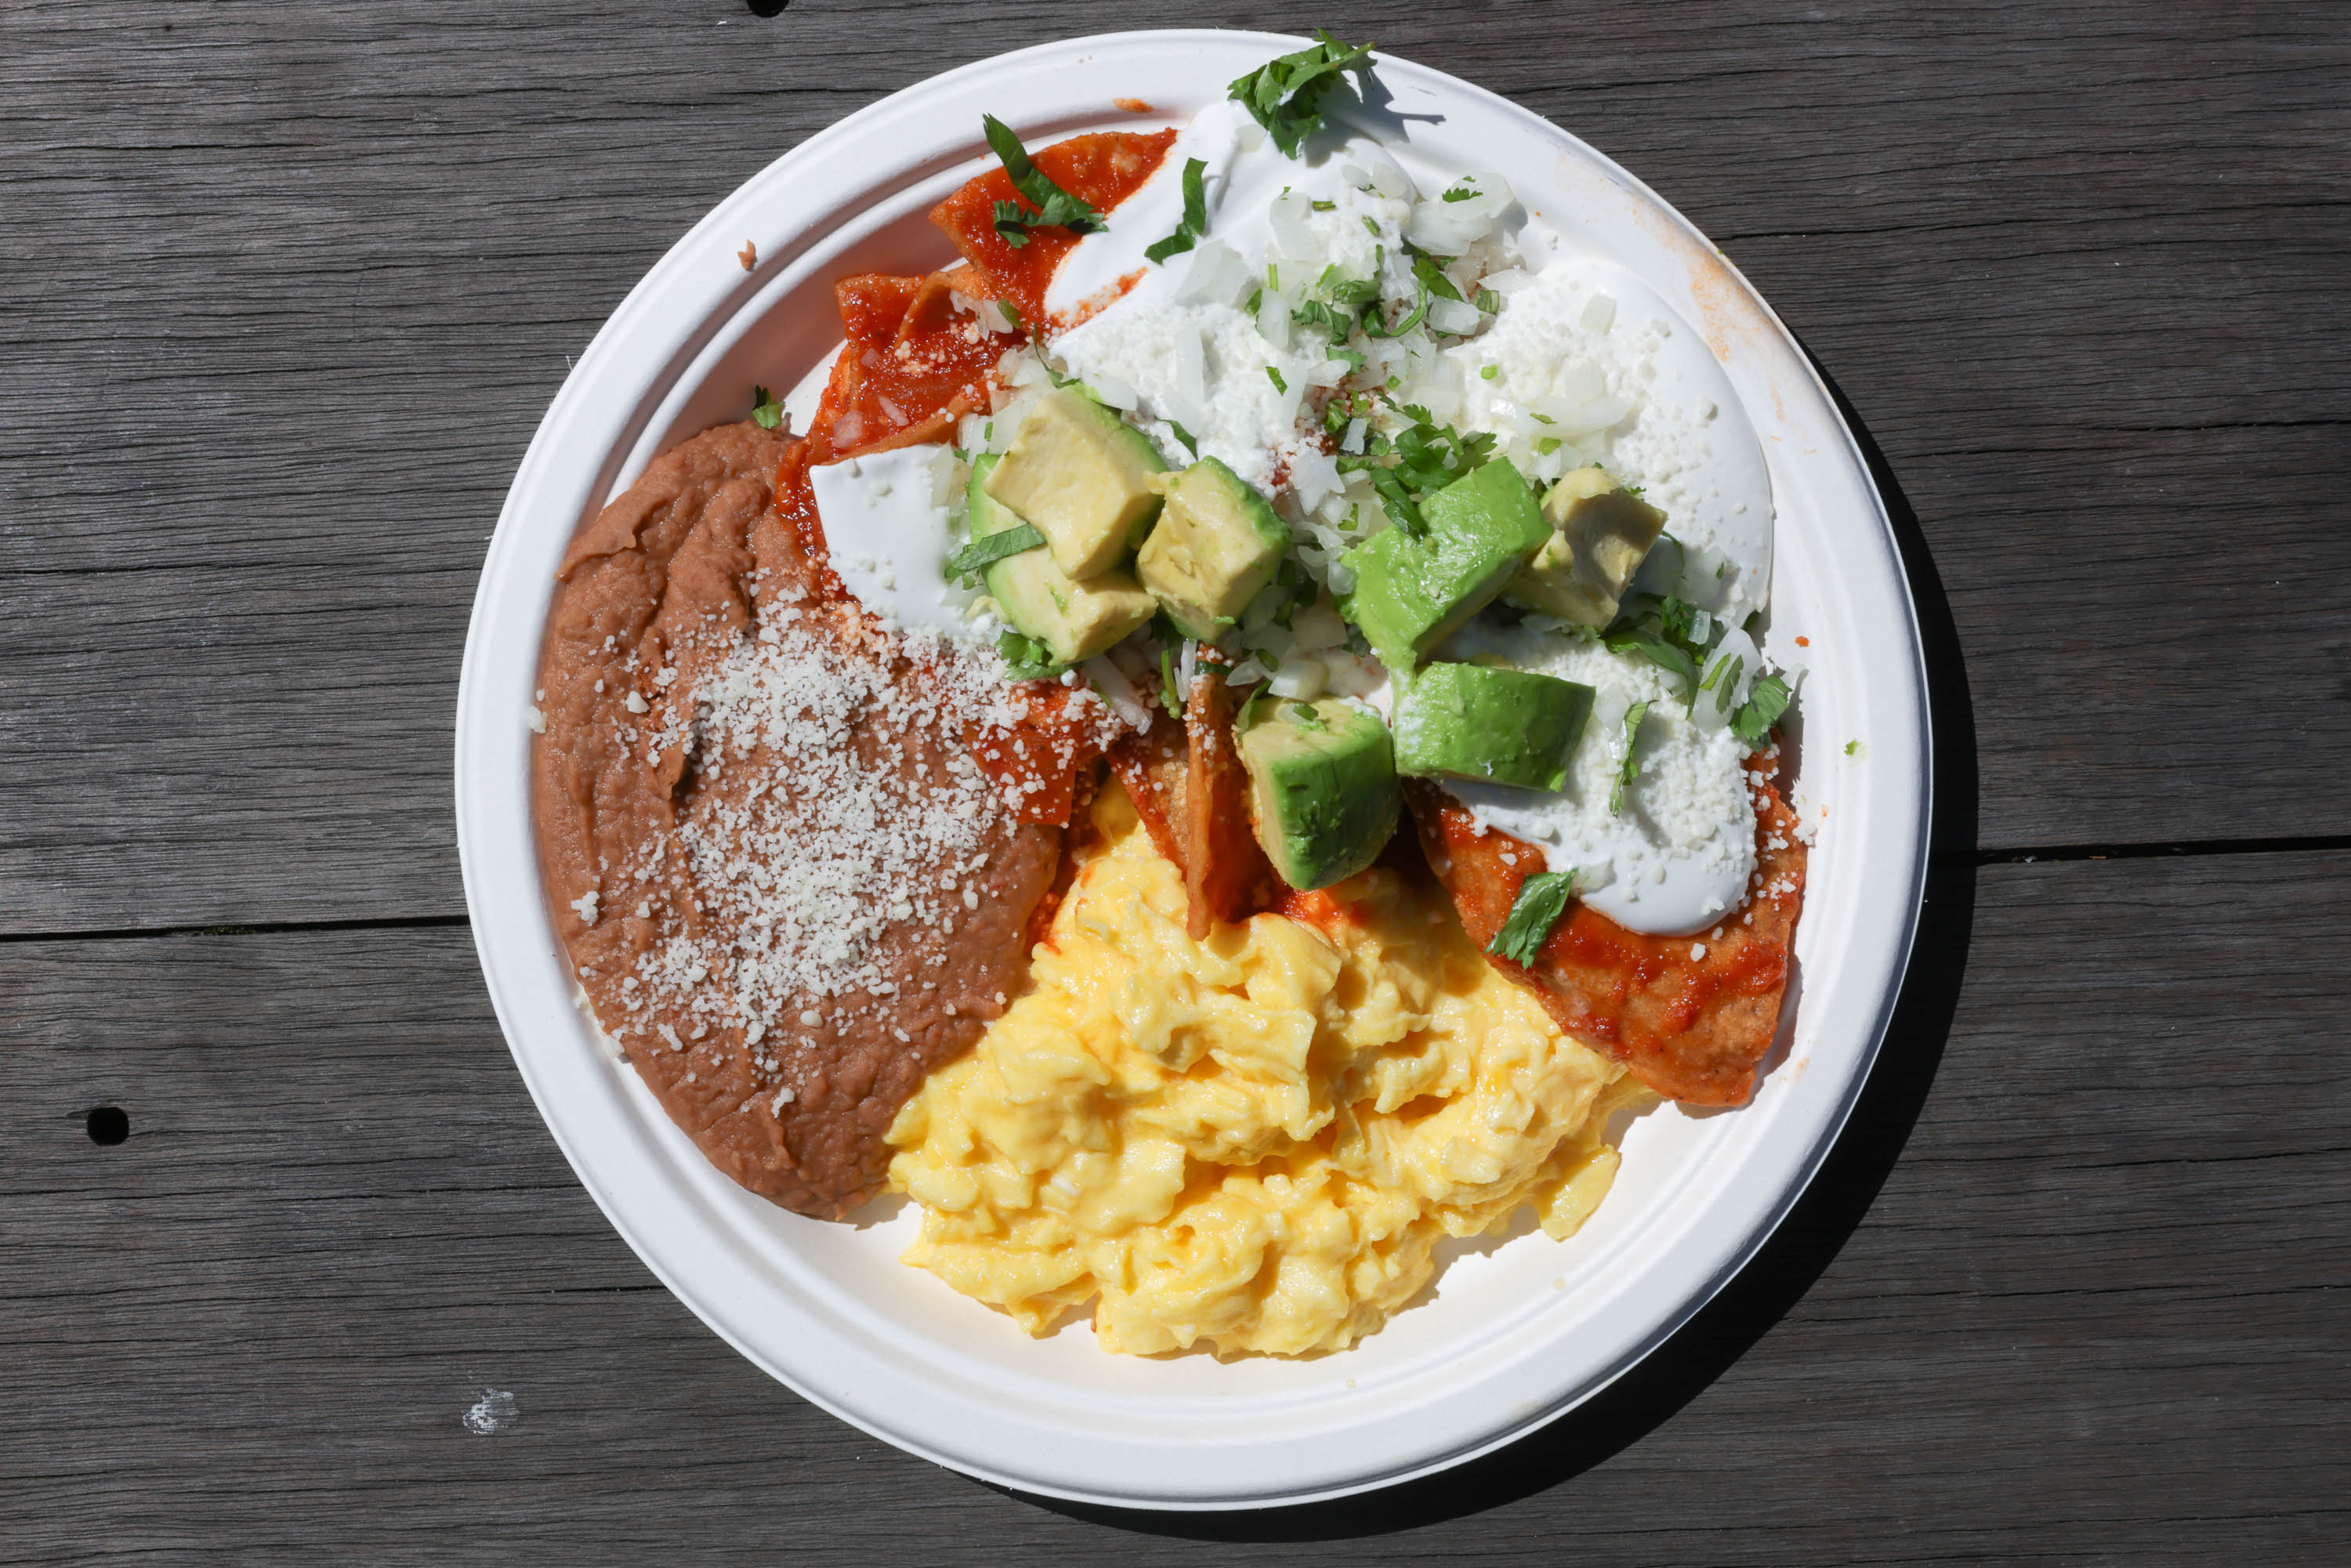 A plate of food with scrambled eggs, refried beans, cheese-topped enchilada, diced avocado, and sour cream.